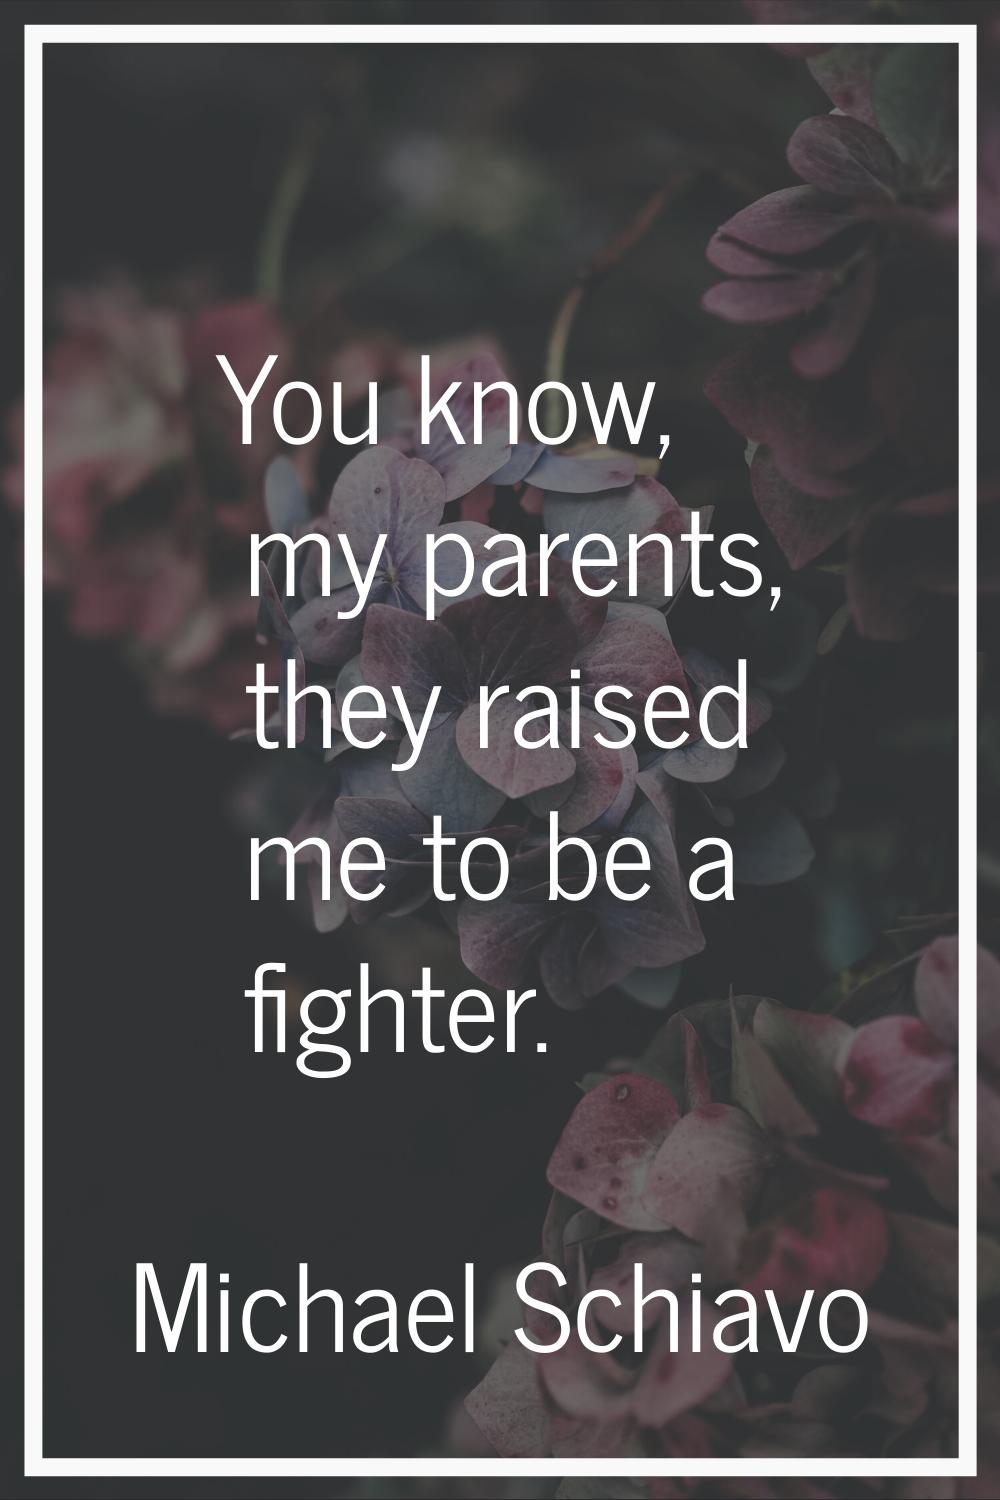 You know, my parents, they raised me to be a fighter.